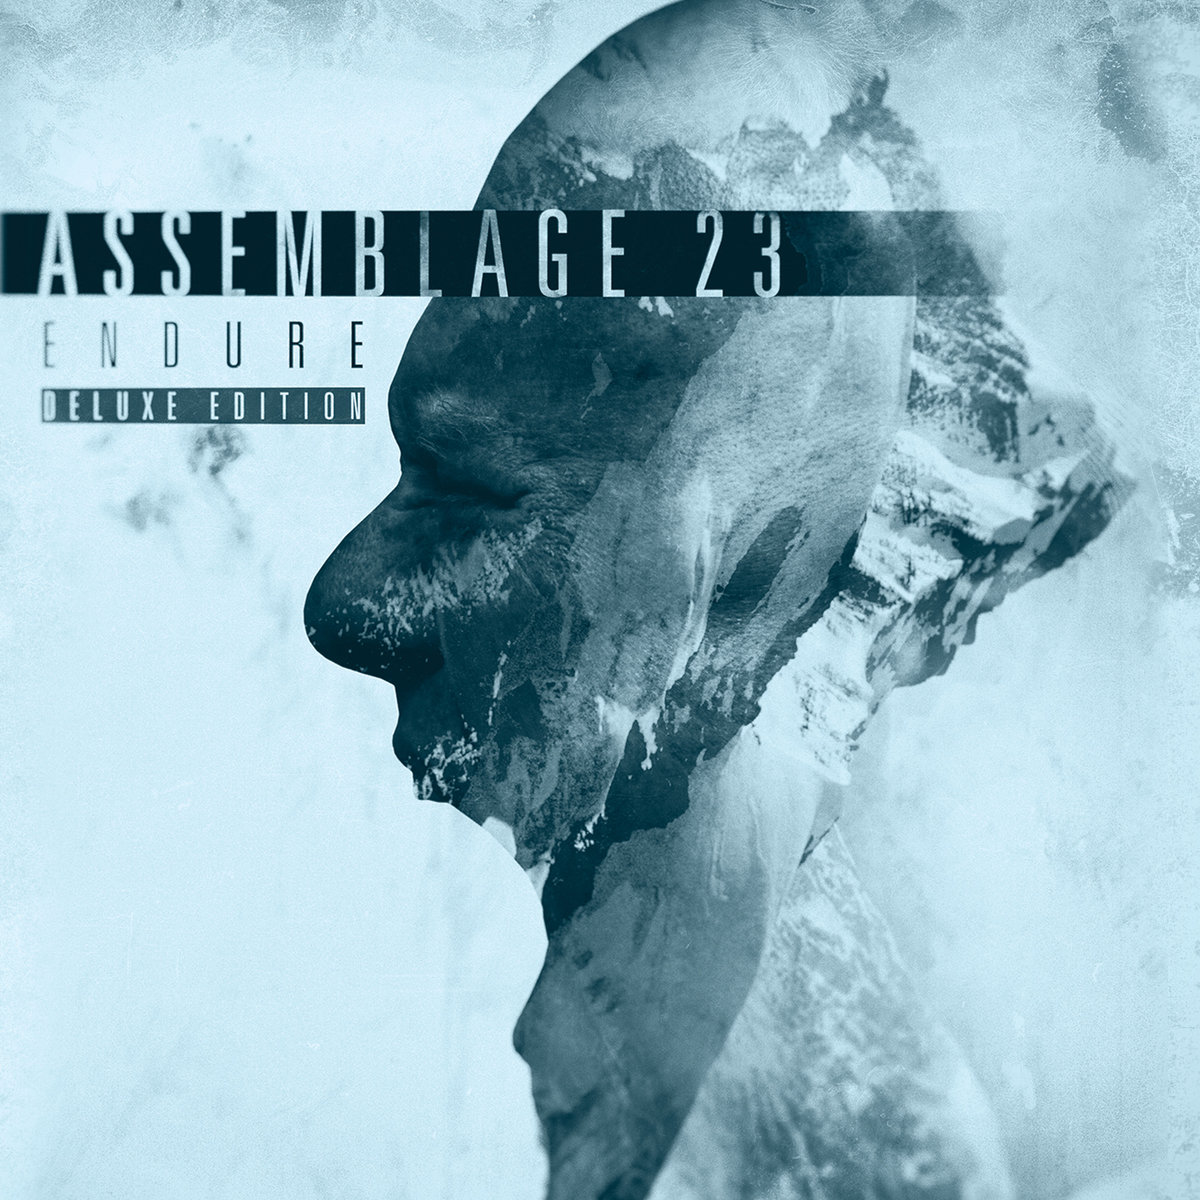 Assemblage 23 youtube